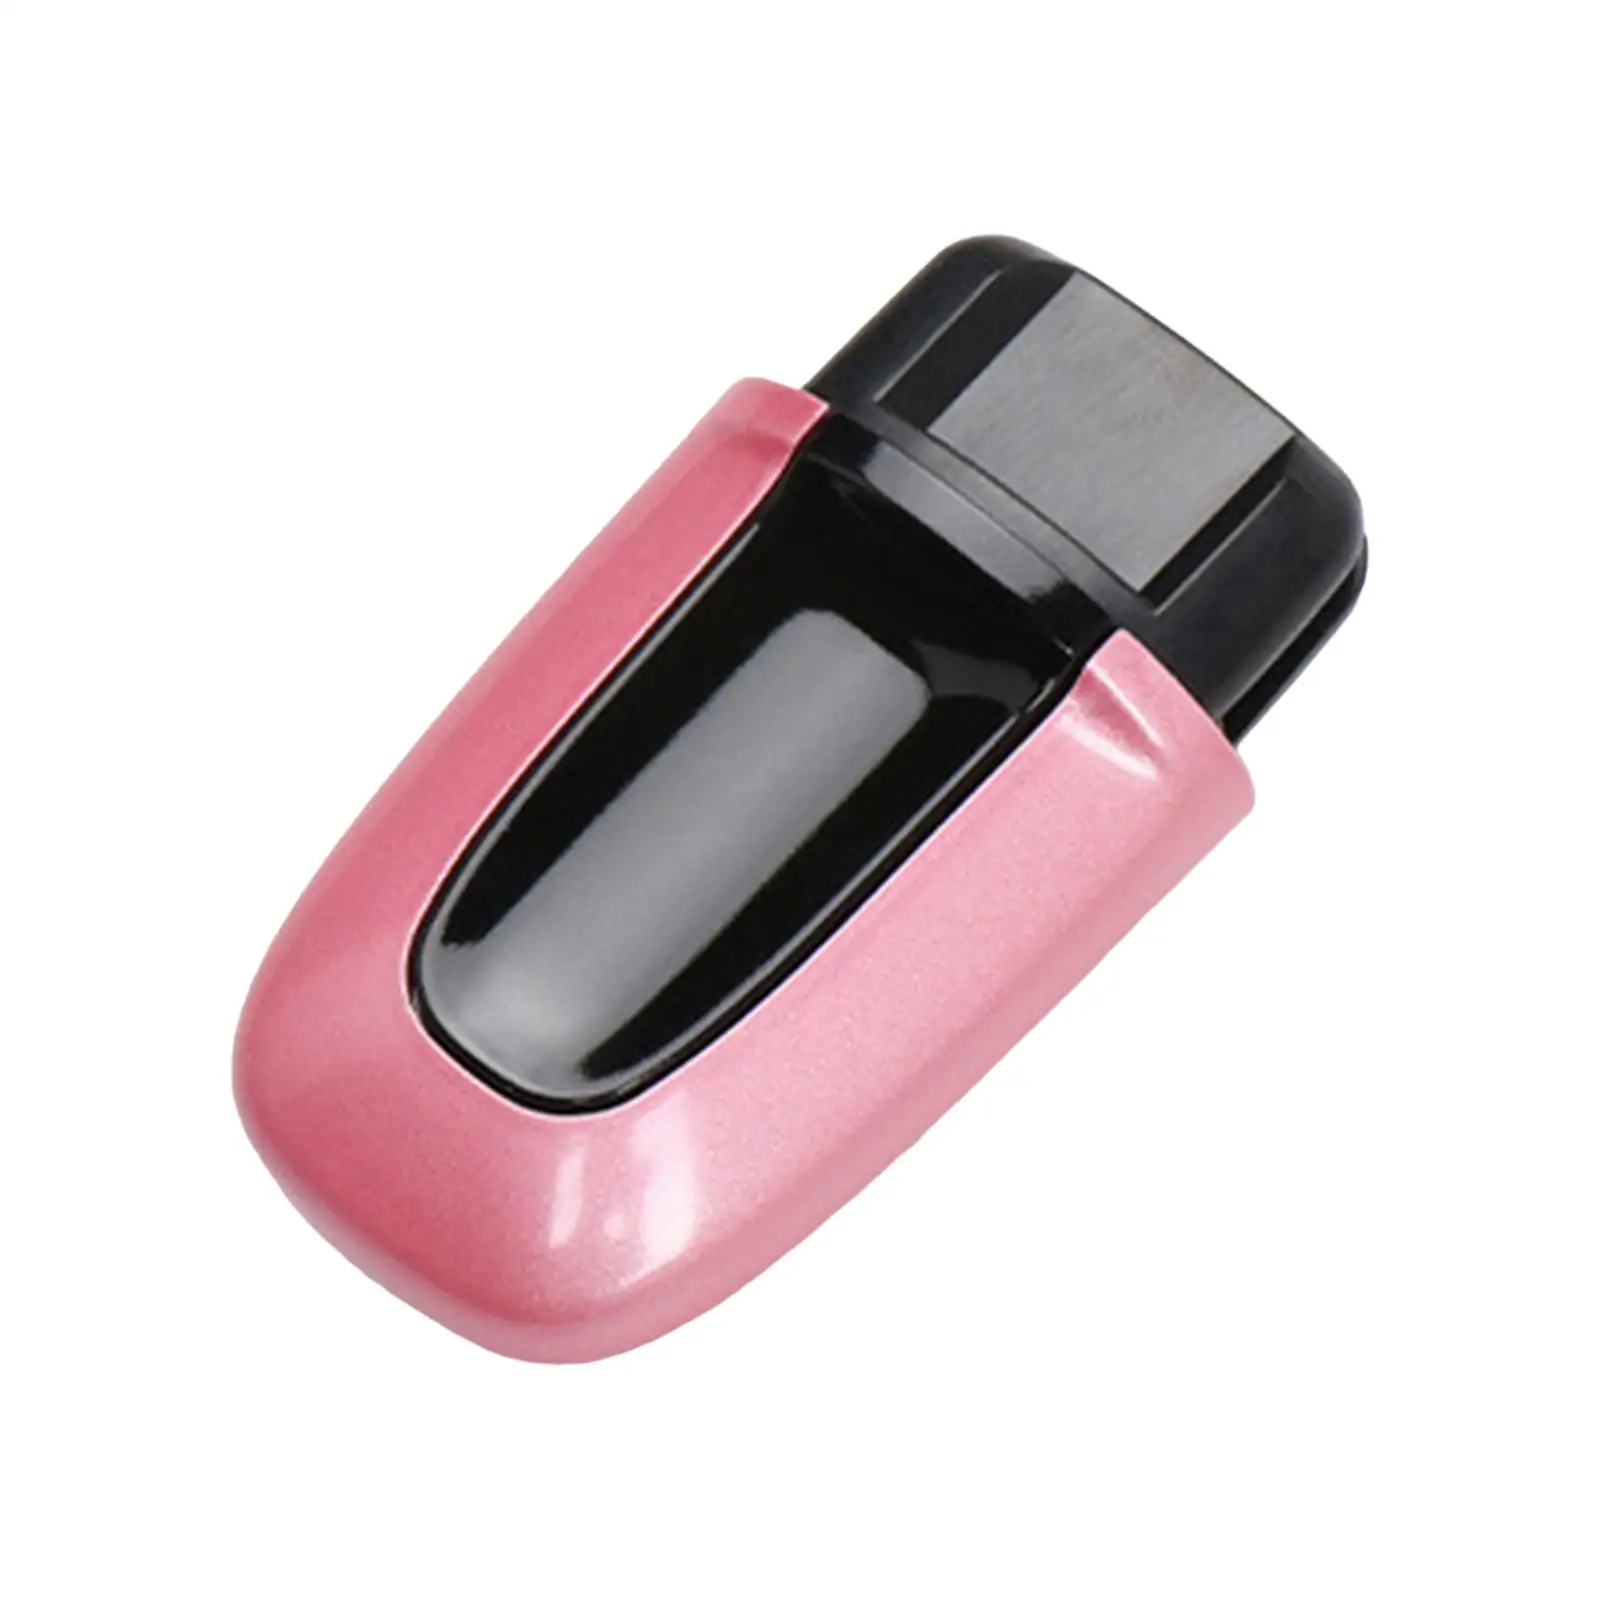 Entry and Drive Dummy Key Plug, 7PP919157A, Spare Parts, High Performance, Premium Durable Car Accessories Replaces